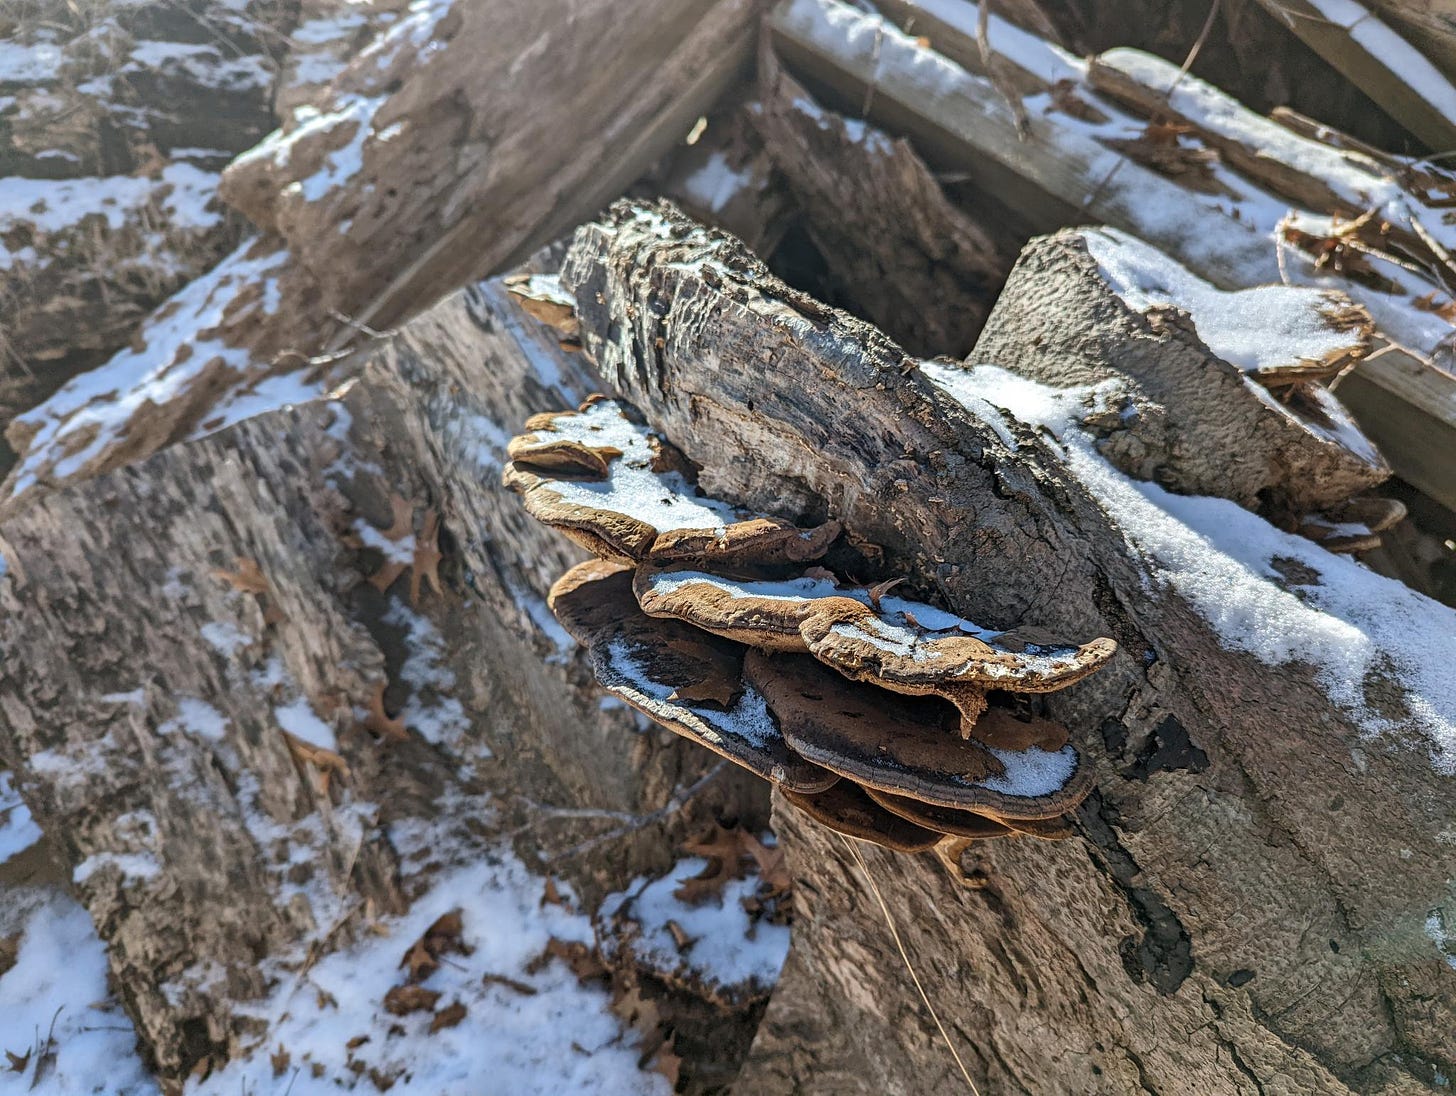 Mushroom growing out of a tree trunk covered with snow